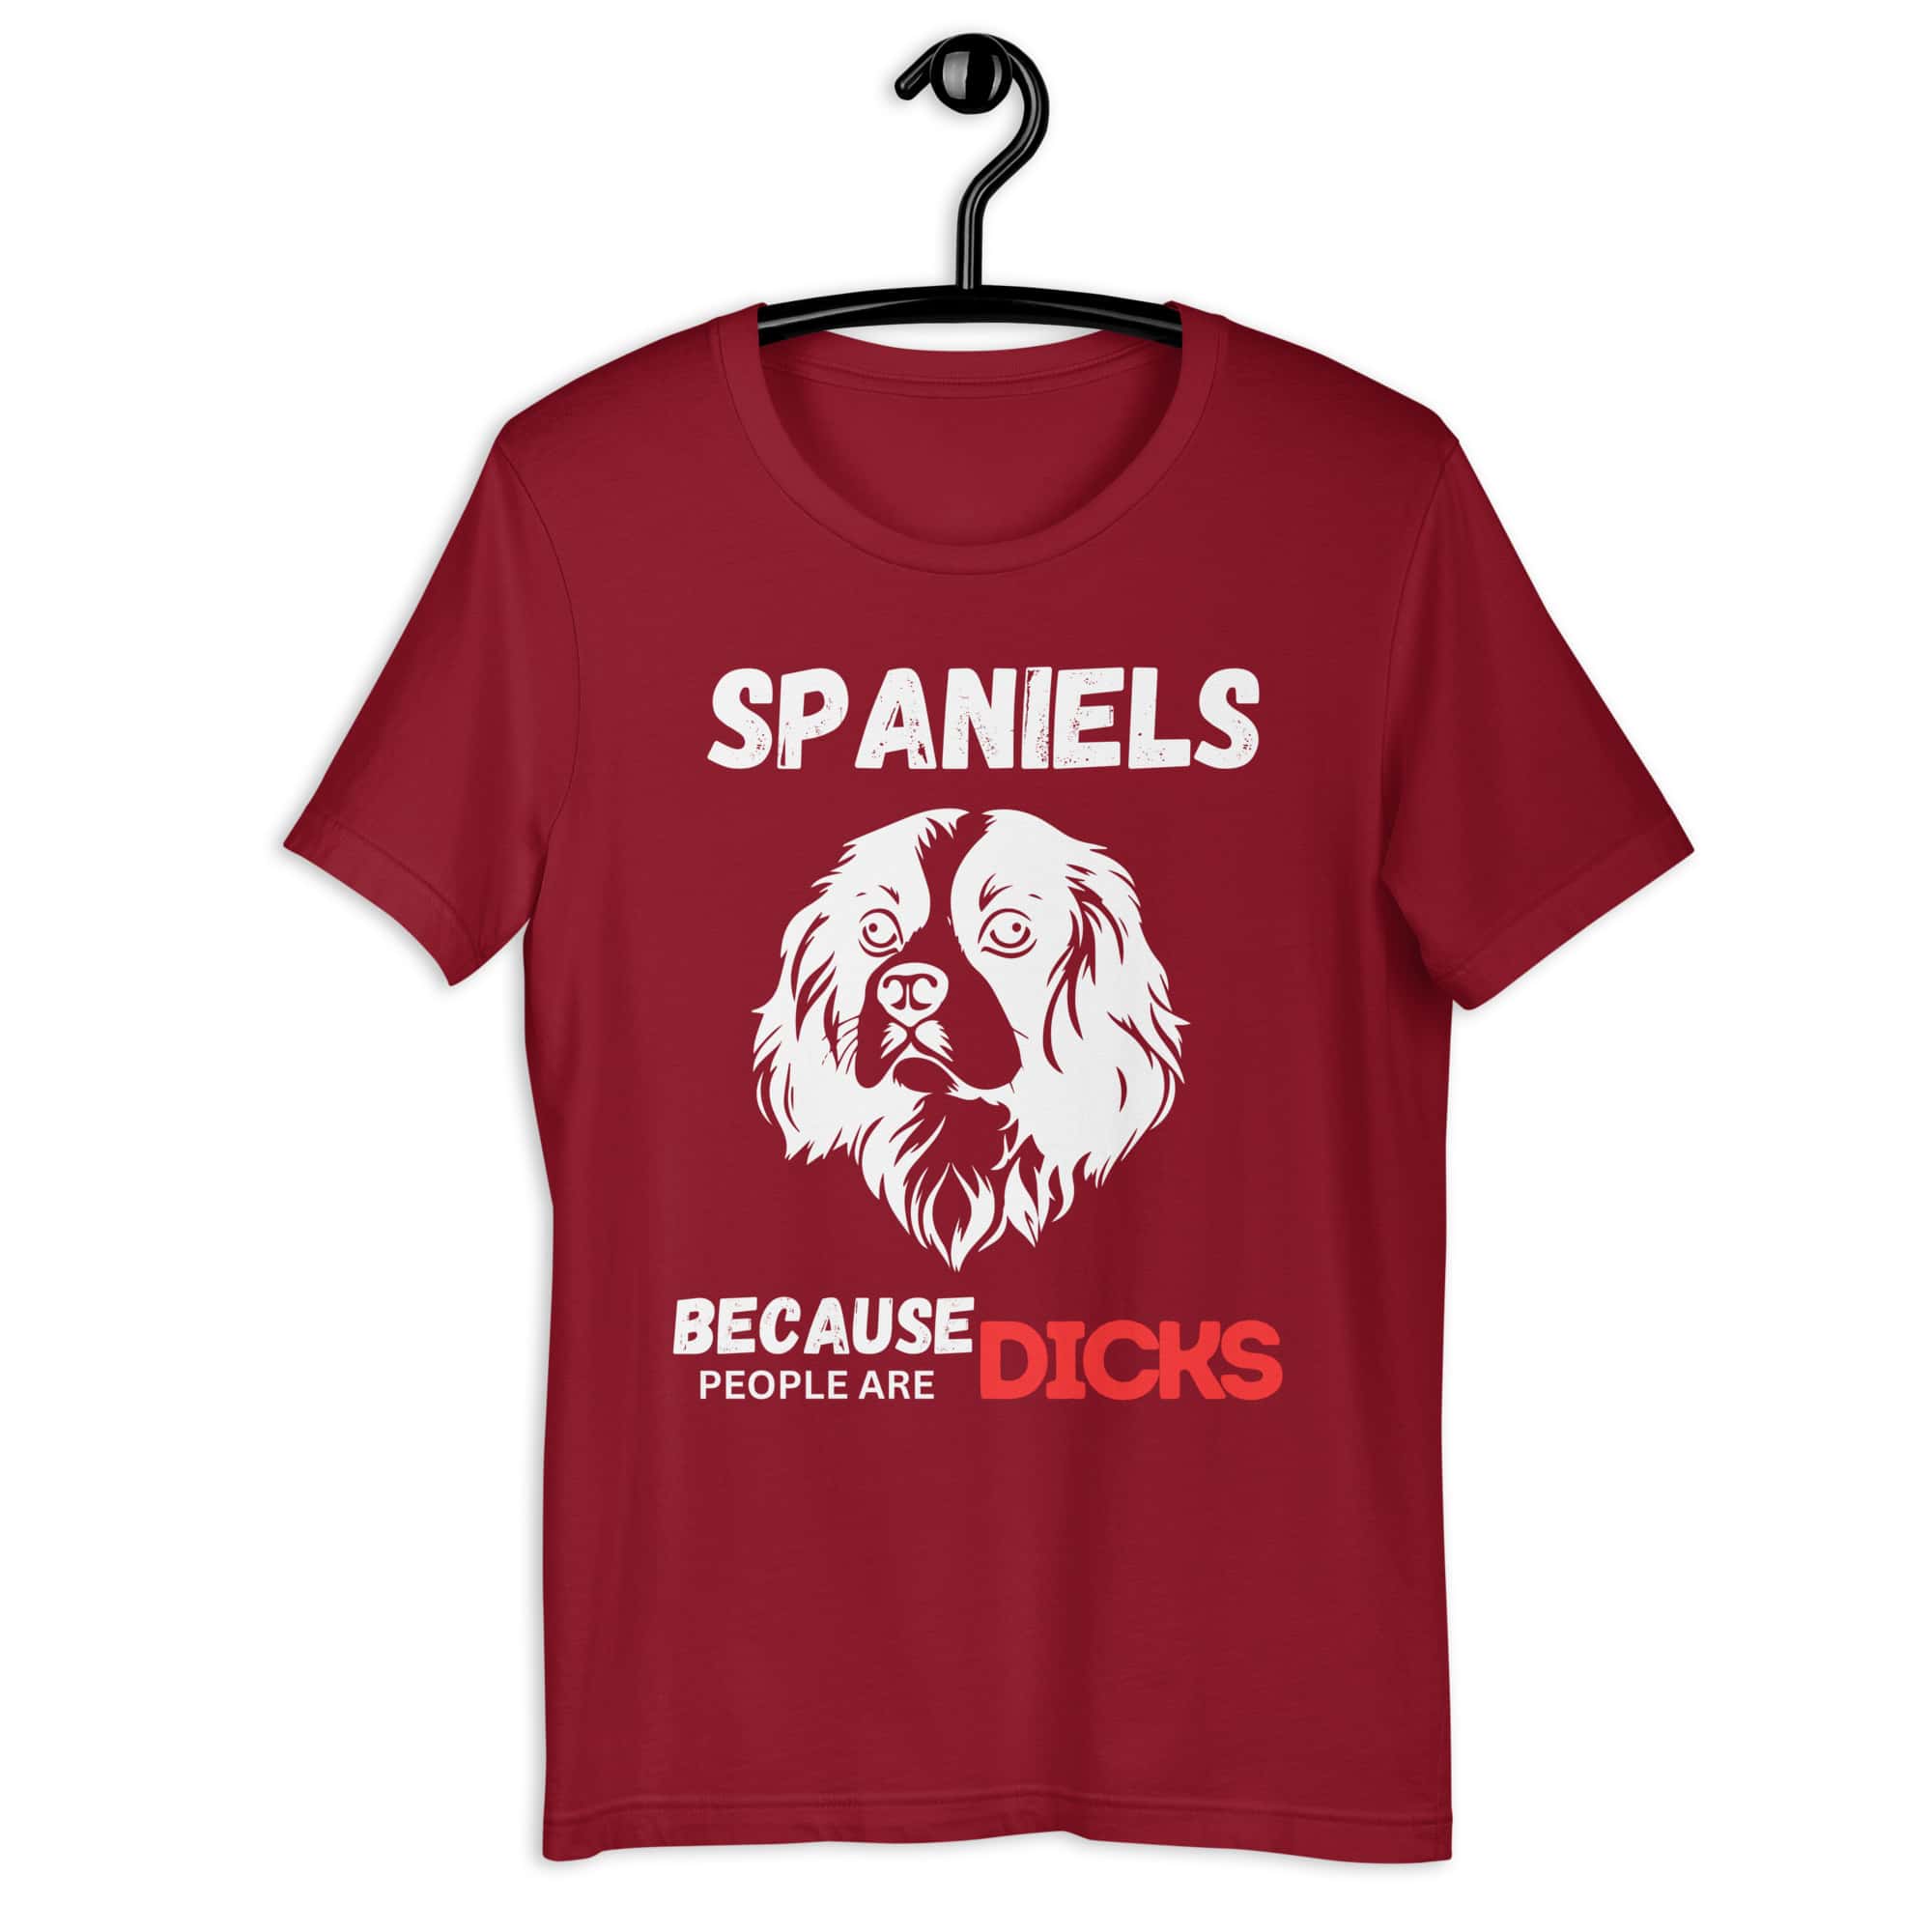 Spaniels Because People Are Dicks Unisex T-Shirt Maroon